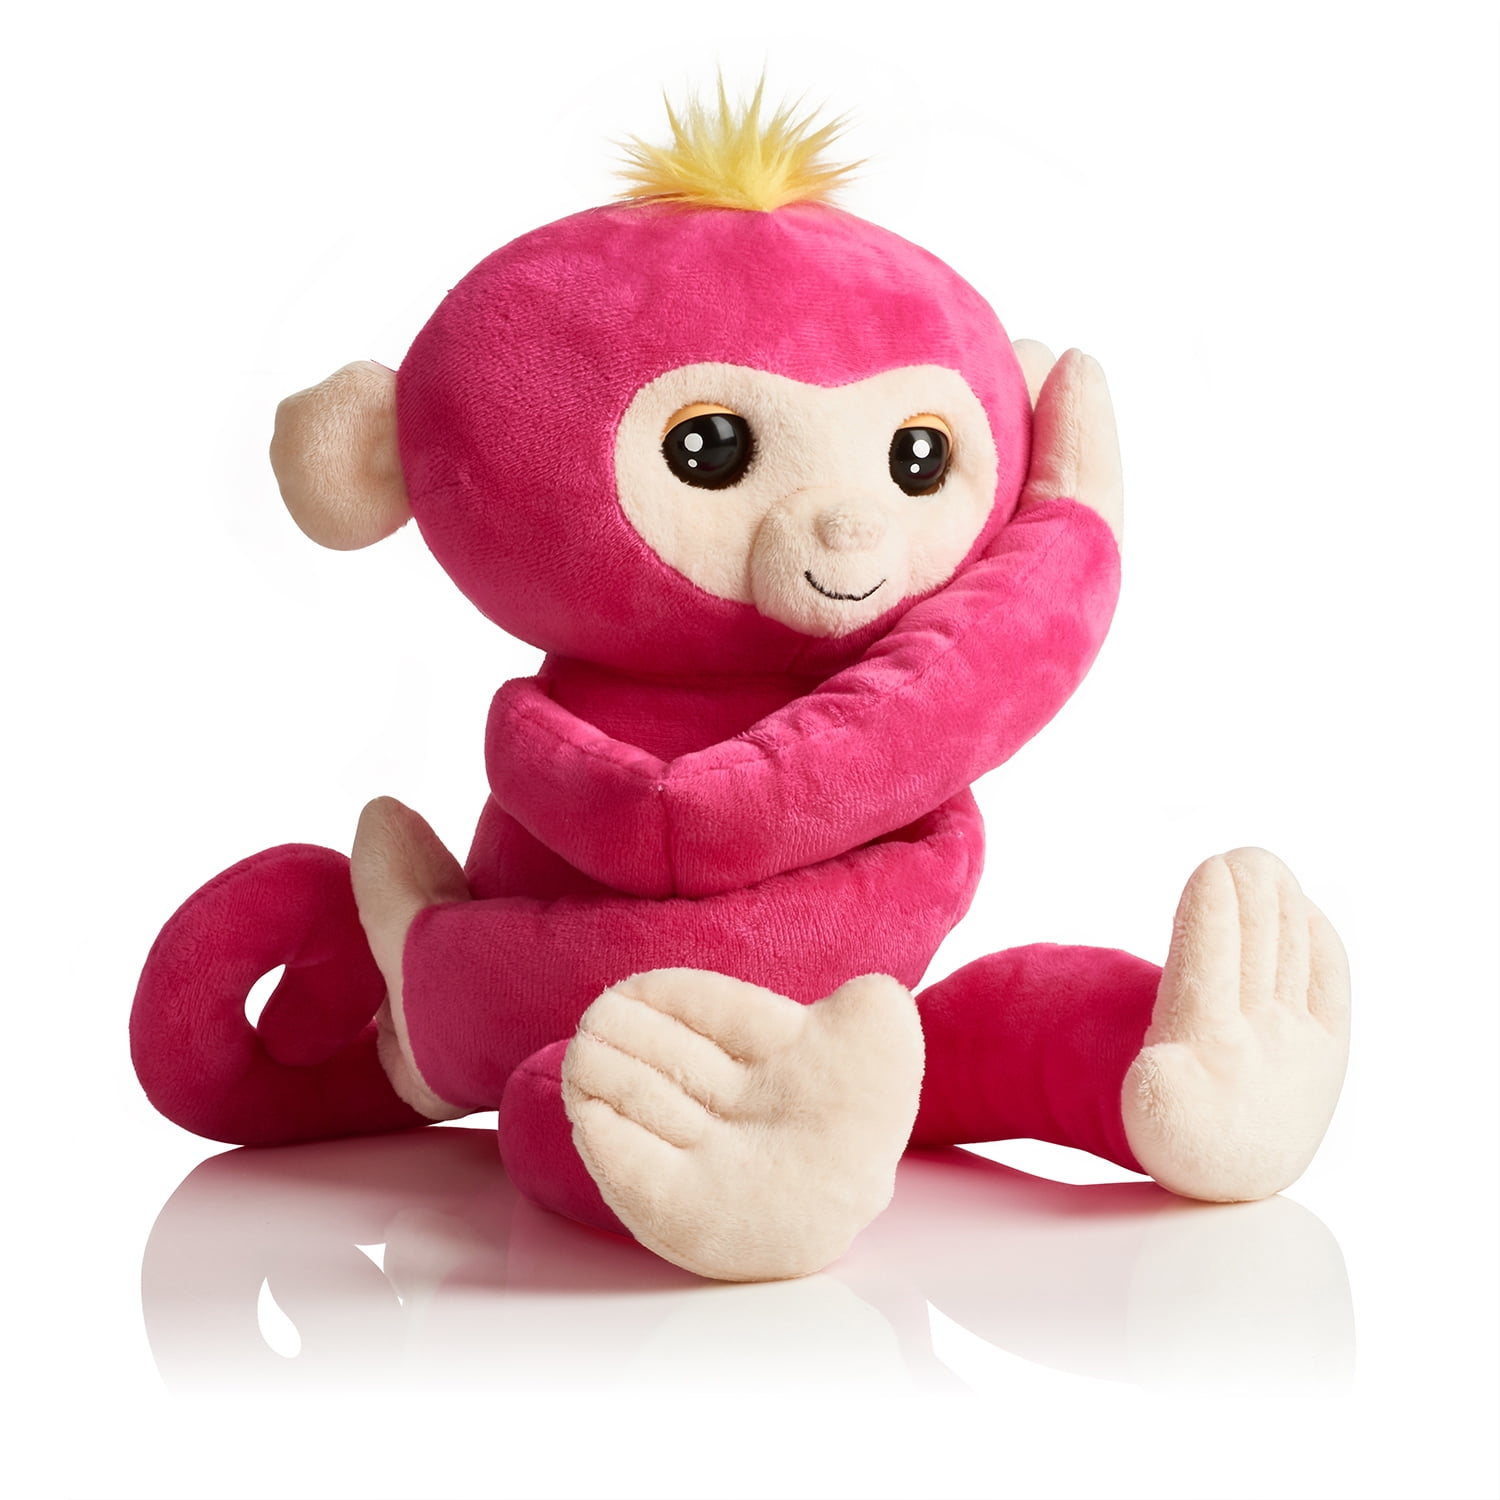 WowWee Fingerlings Baby Monkey & Friendly Interactive Toy for sale online 